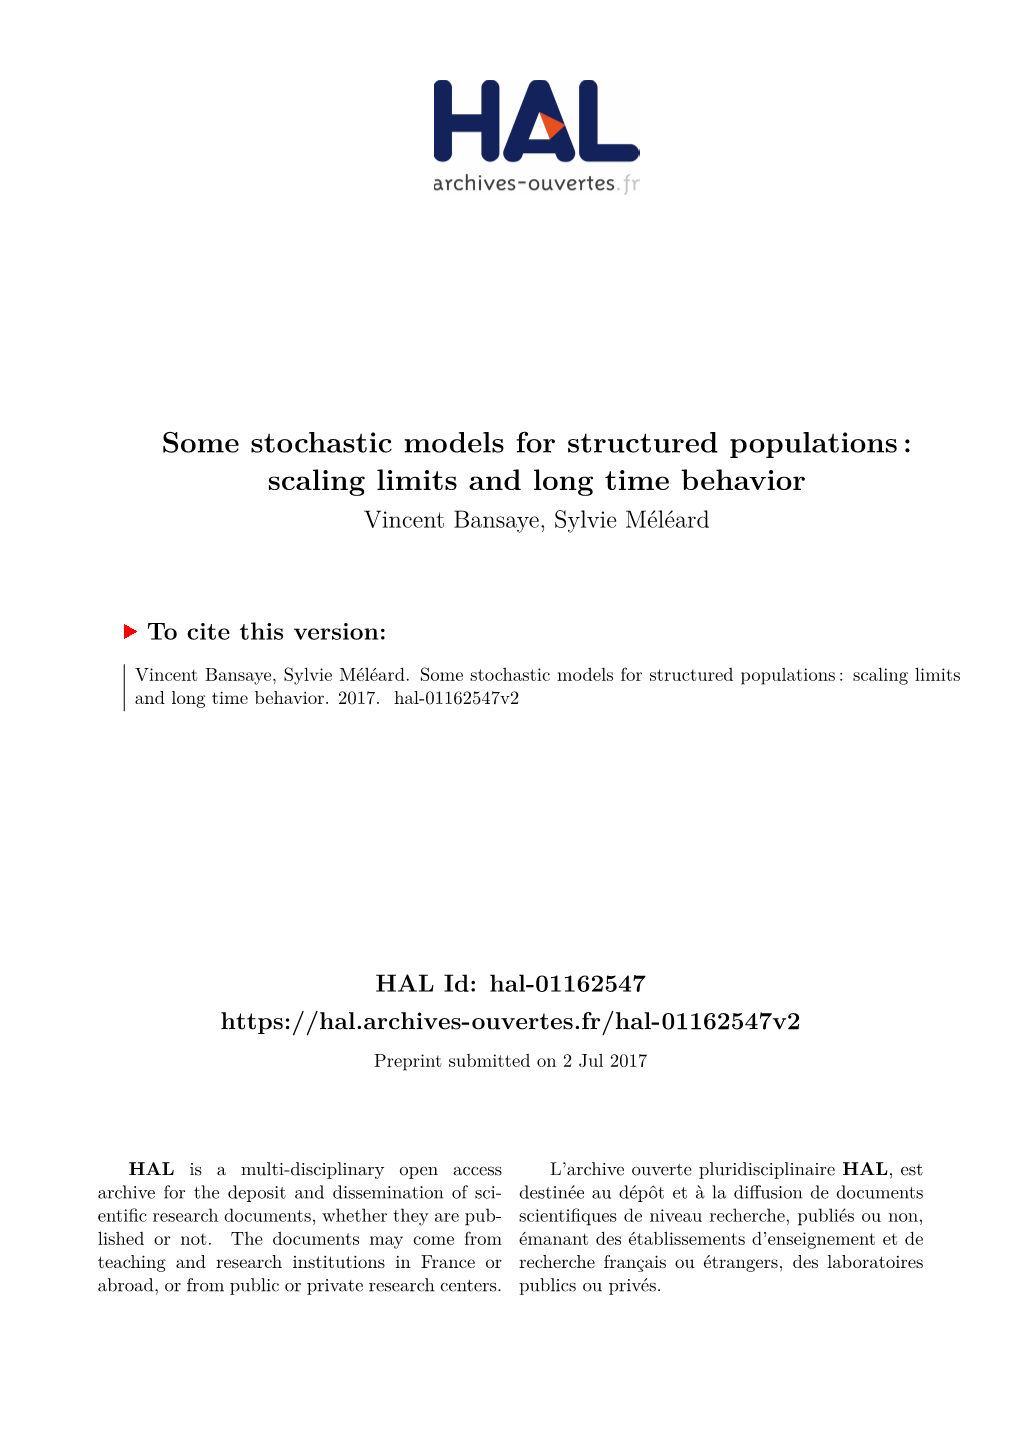 Some Stochastic Models for Structured Populations : Scaling Limits and Long Time Behavior Vincent Bansaye, Sylvie Méléard